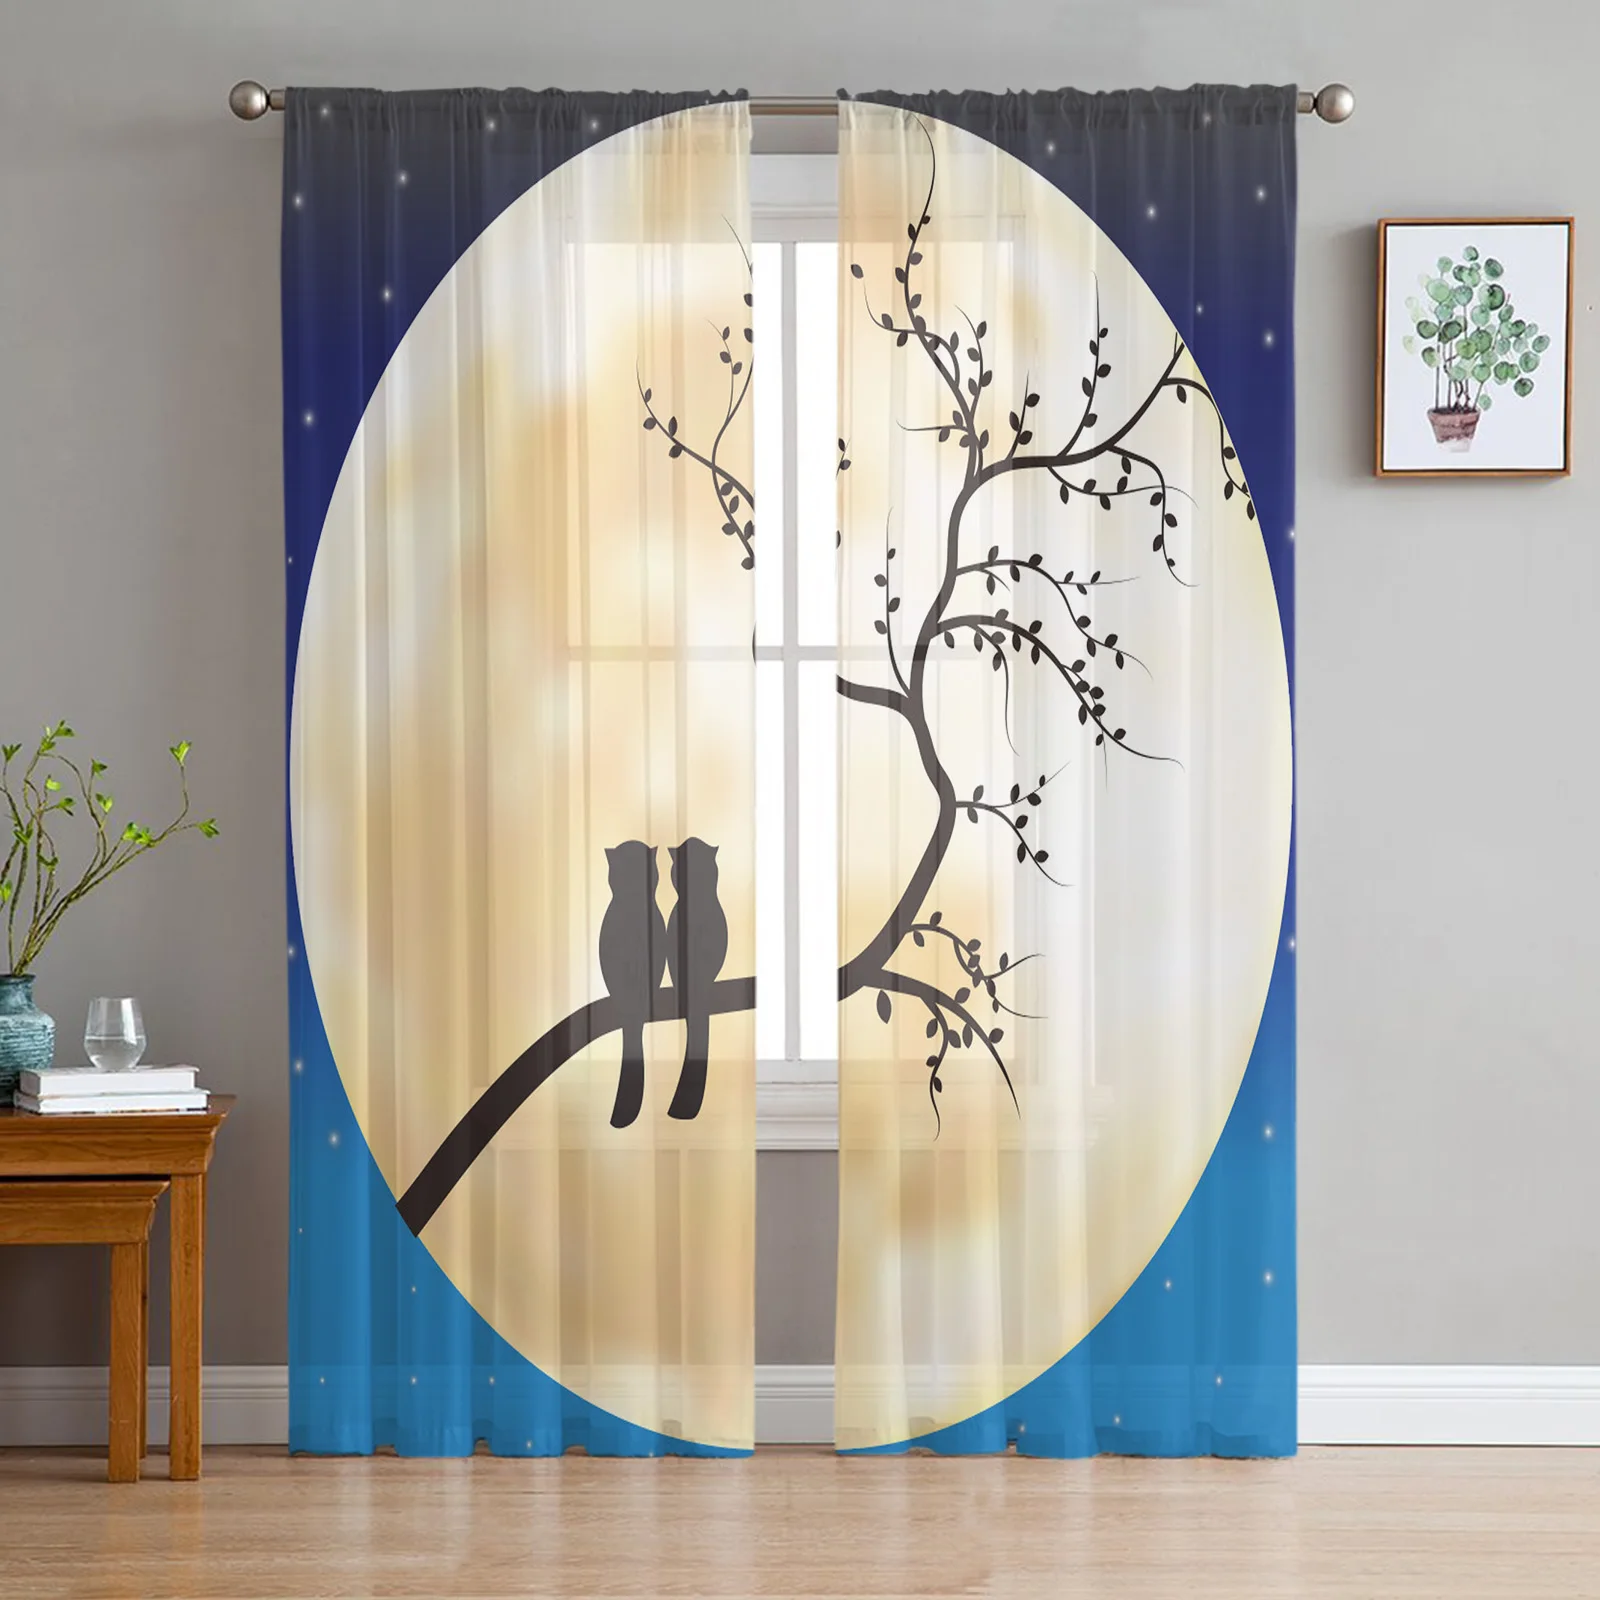 

Owl Silhouette Moon Branch Tulle Sheer Curtains for Living Room Decoration Drapes Bedroom Kitchen Voile Organza Window Curtain